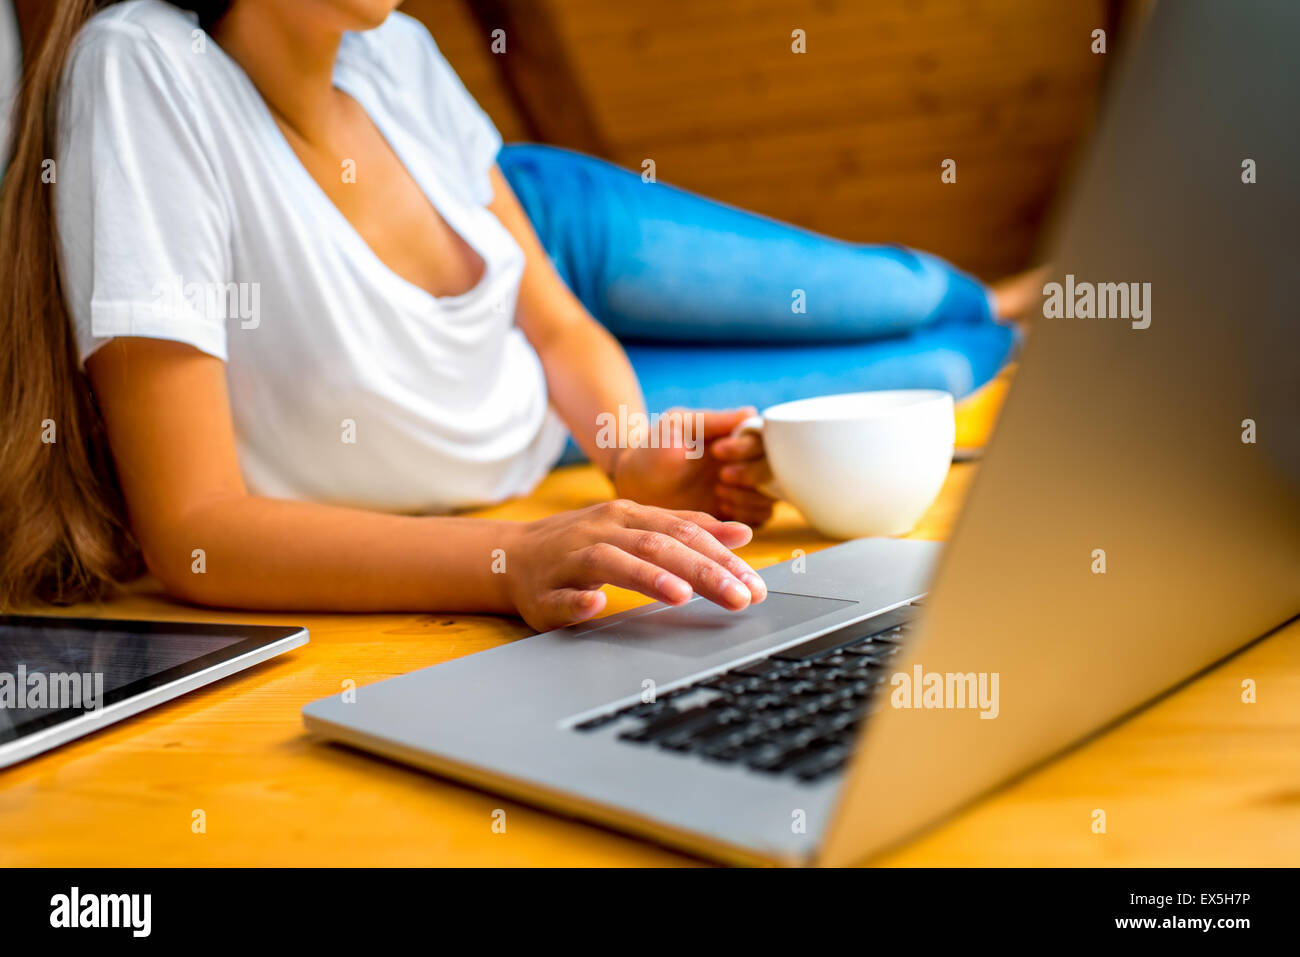 Woman working with laptop on the wooden floor Stock Photo